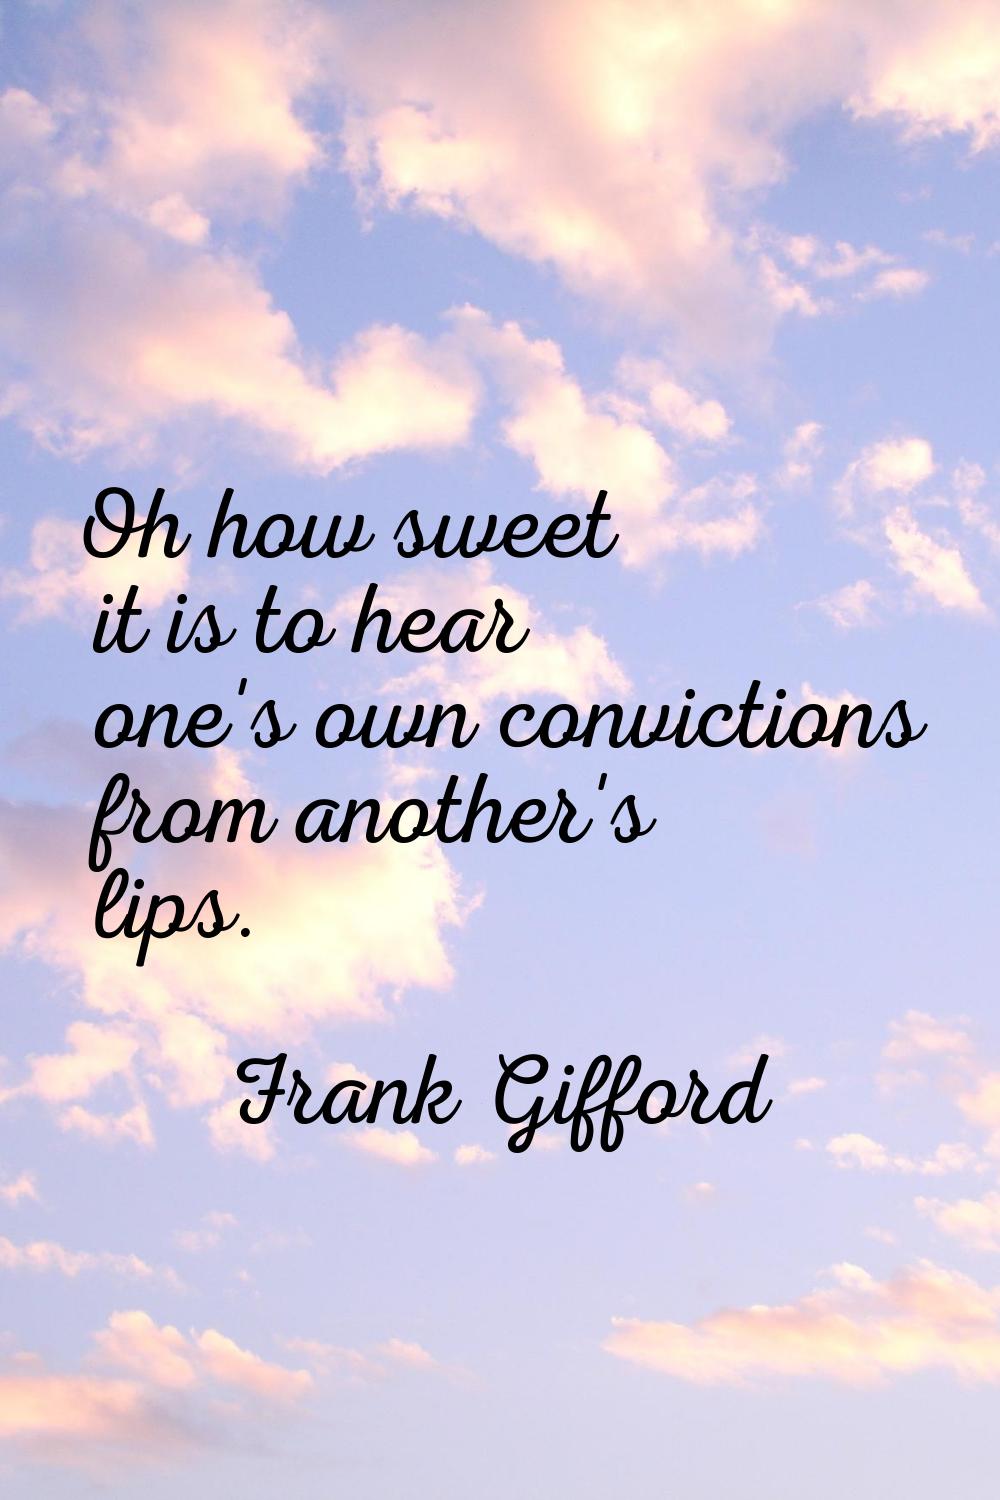 Oh how sweet it is to hear one's own convictions from another's lips.